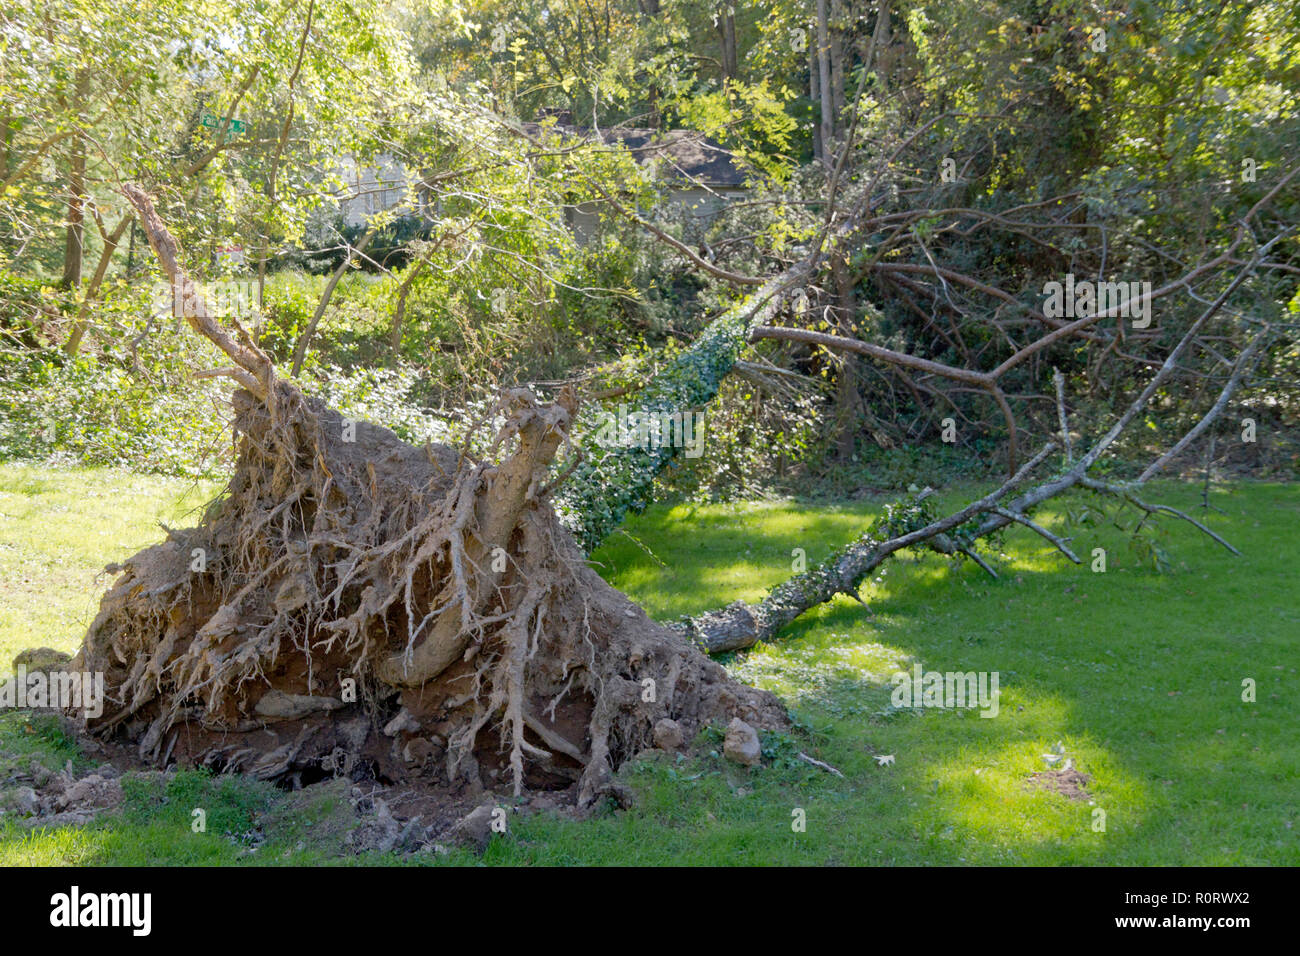 A pine tree knocked over by a windstorm lies on the grass with its root ball exposed Stock Photo